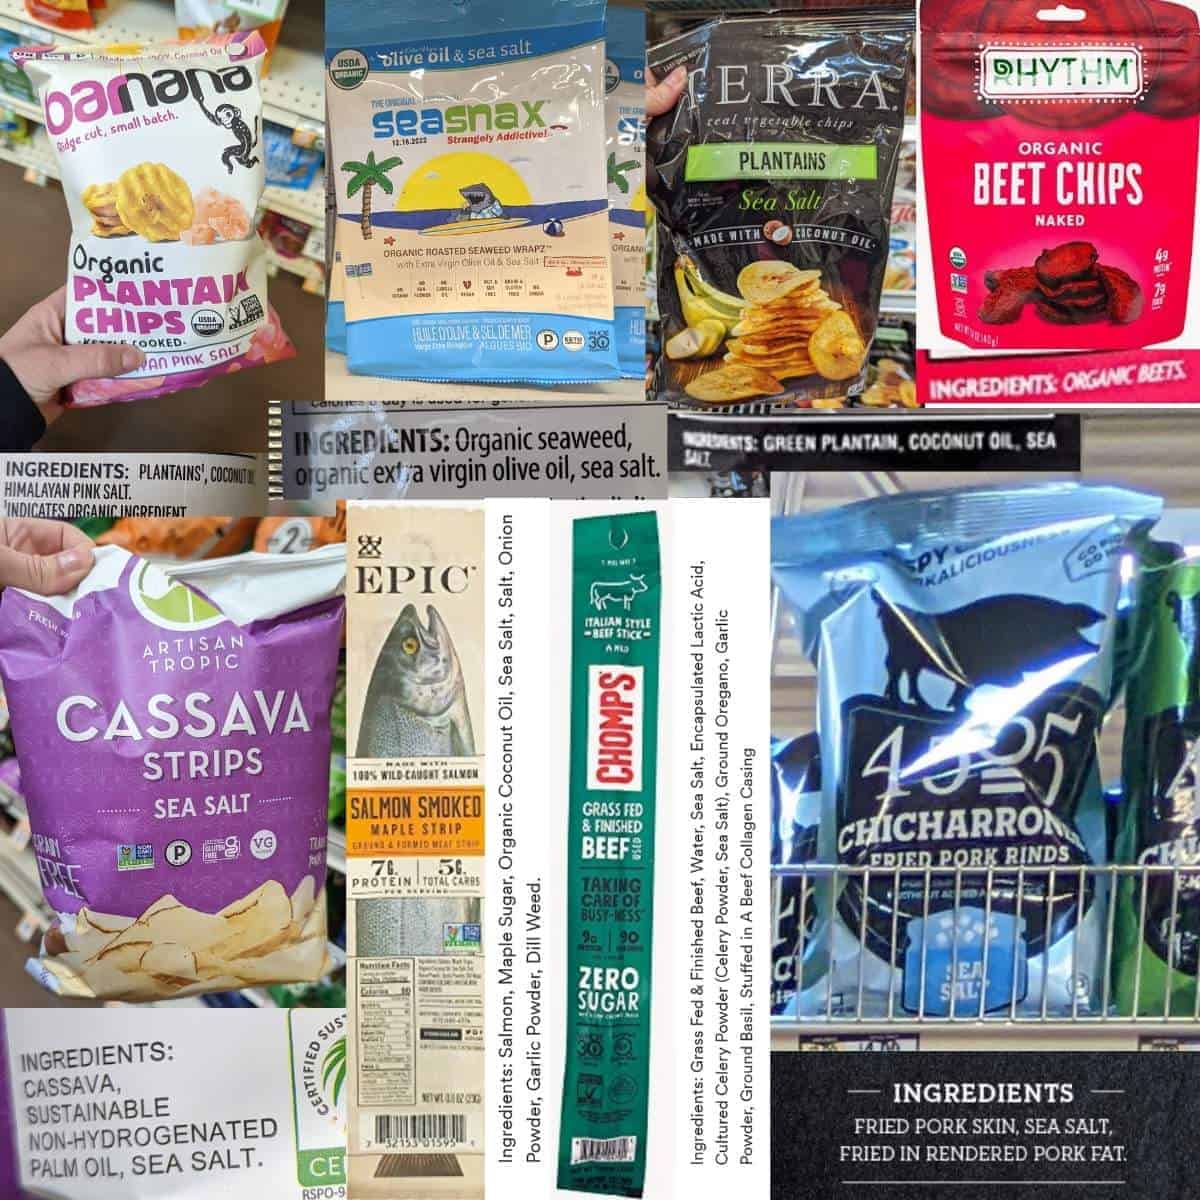 Various savory and salty snacks from Whole Foods